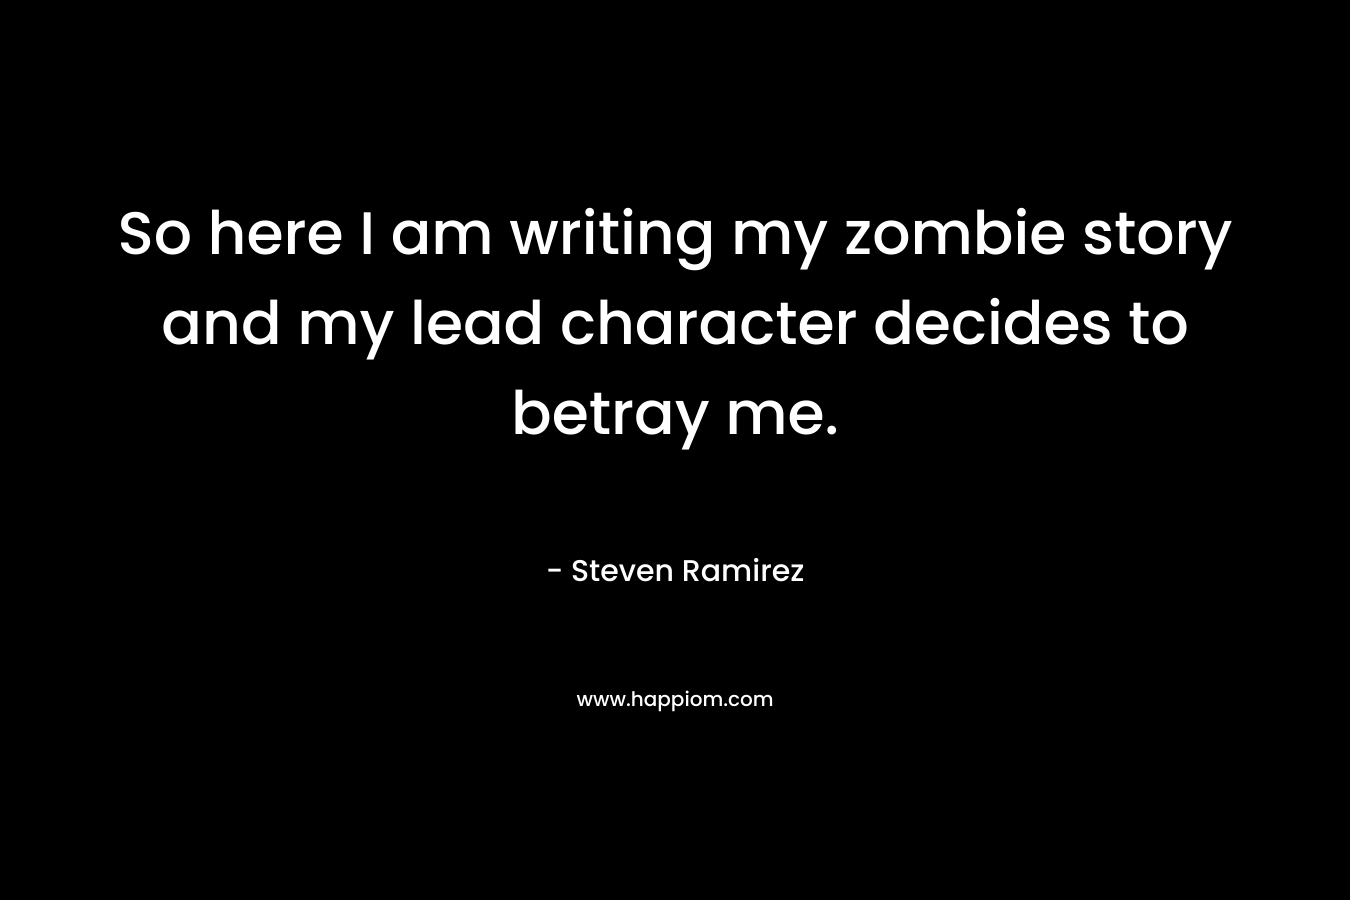 So here I am writing my zombie story and my lead character decides to betray me. – Steven Ramirez